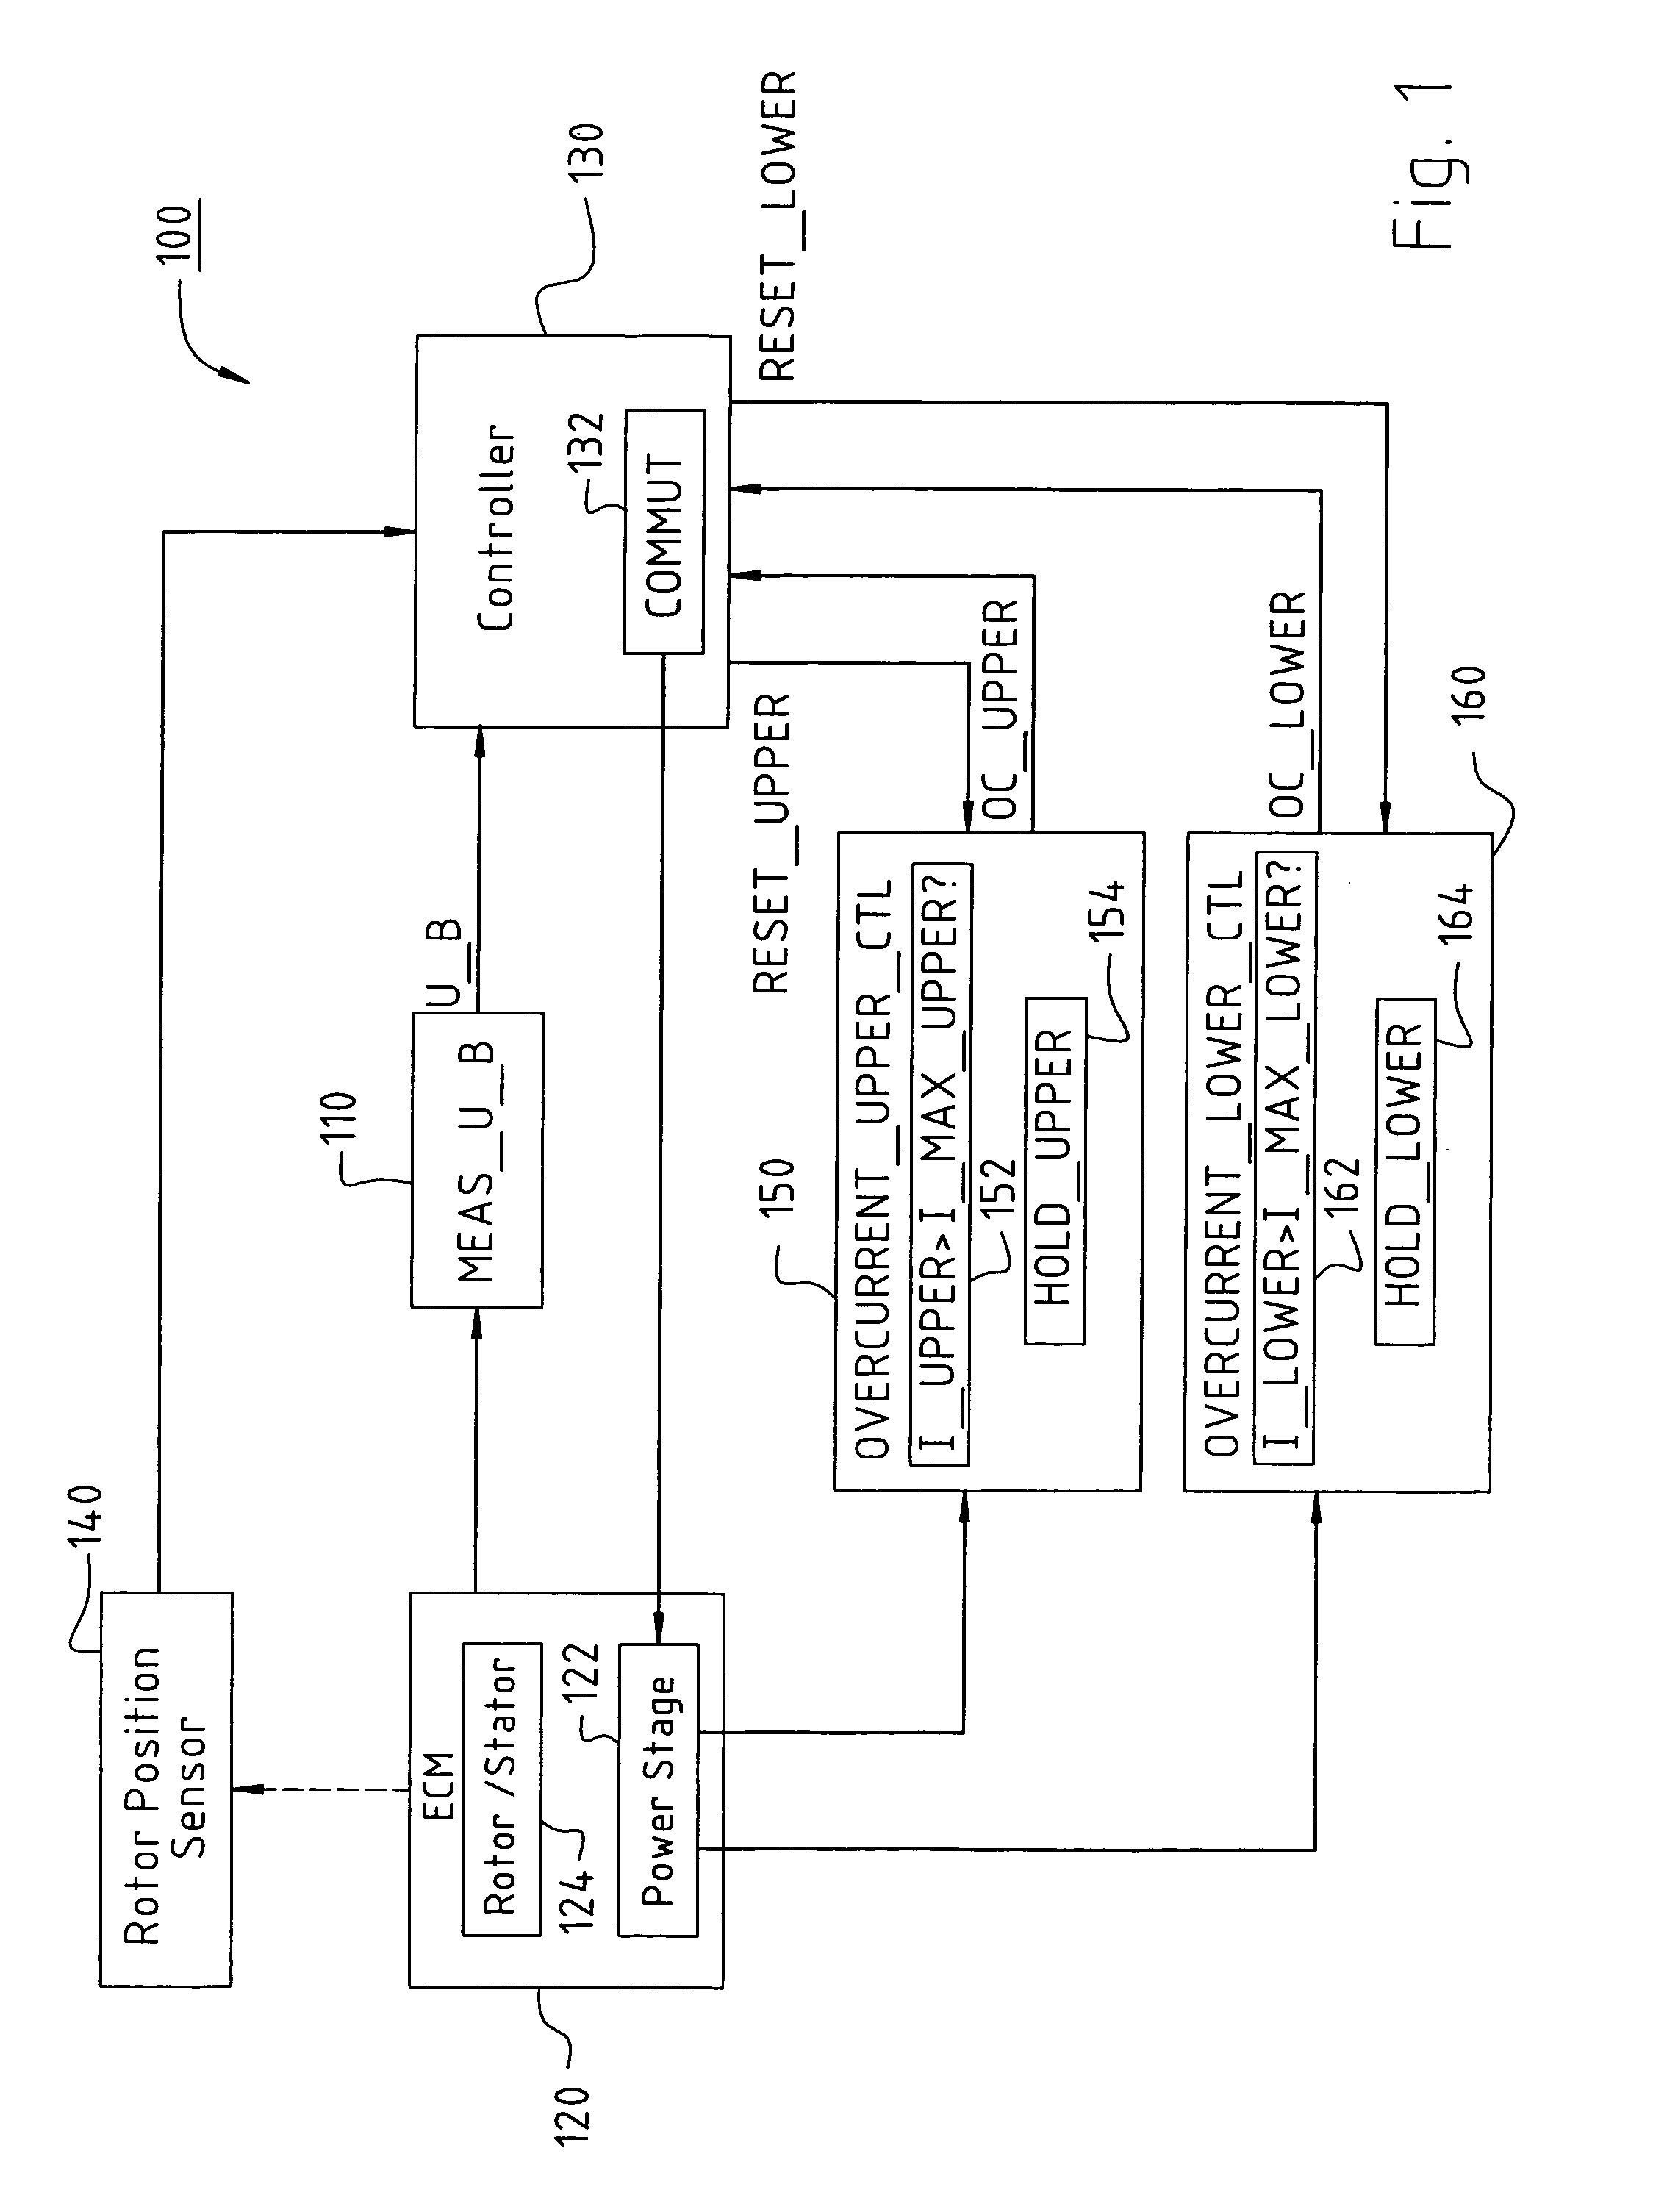 Electronically commutated motor (ECM) and method of controlling an ecm